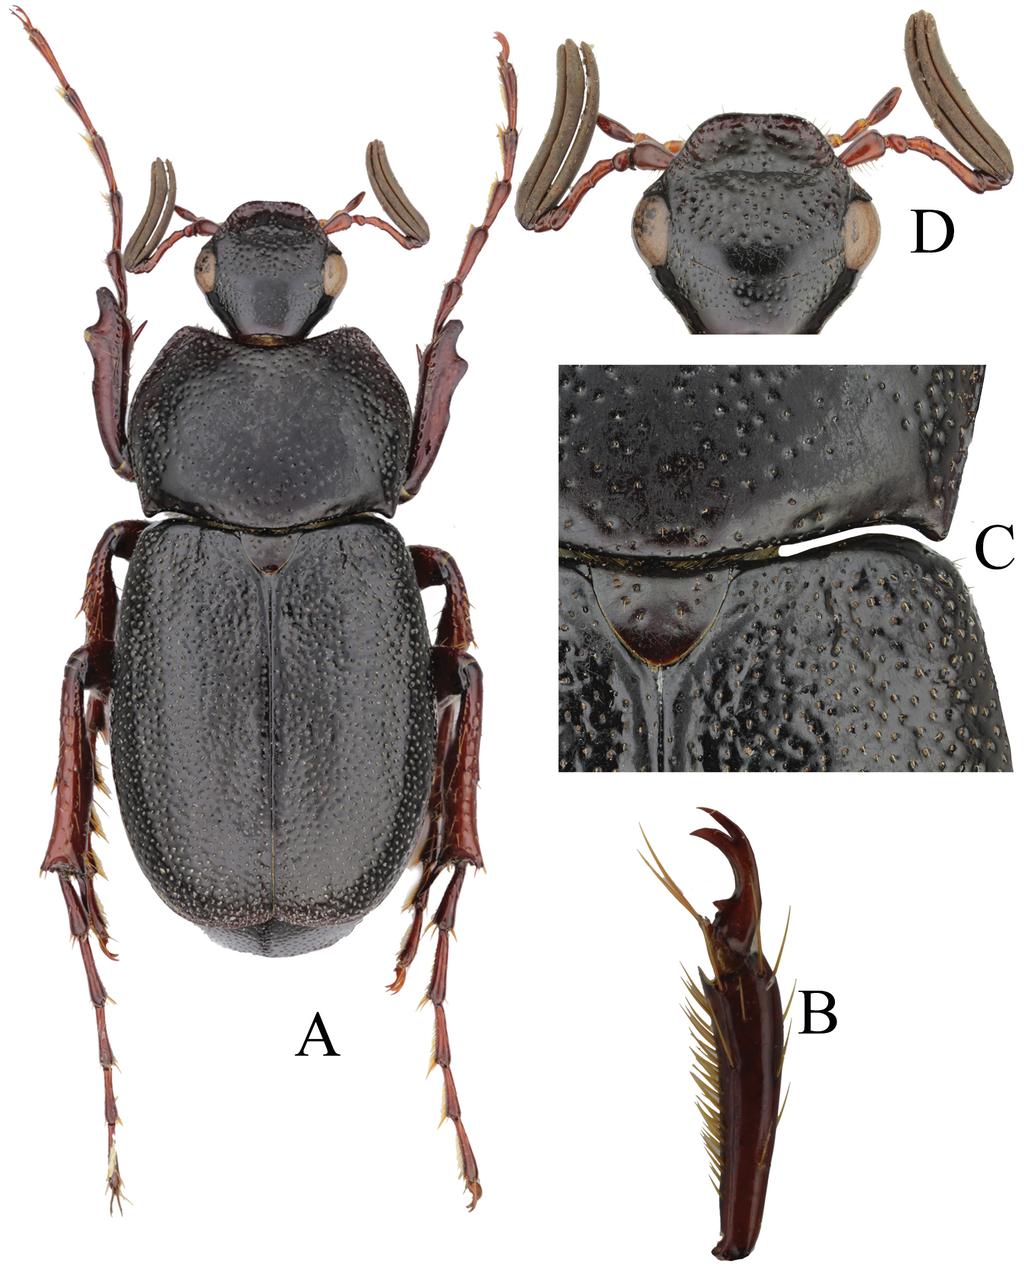 154 SEHNAL et al.: Revision of the Canuschiza insularis species group (Scarabaeidae) Figs 6A D. Canuschiza hagher sp. nov.